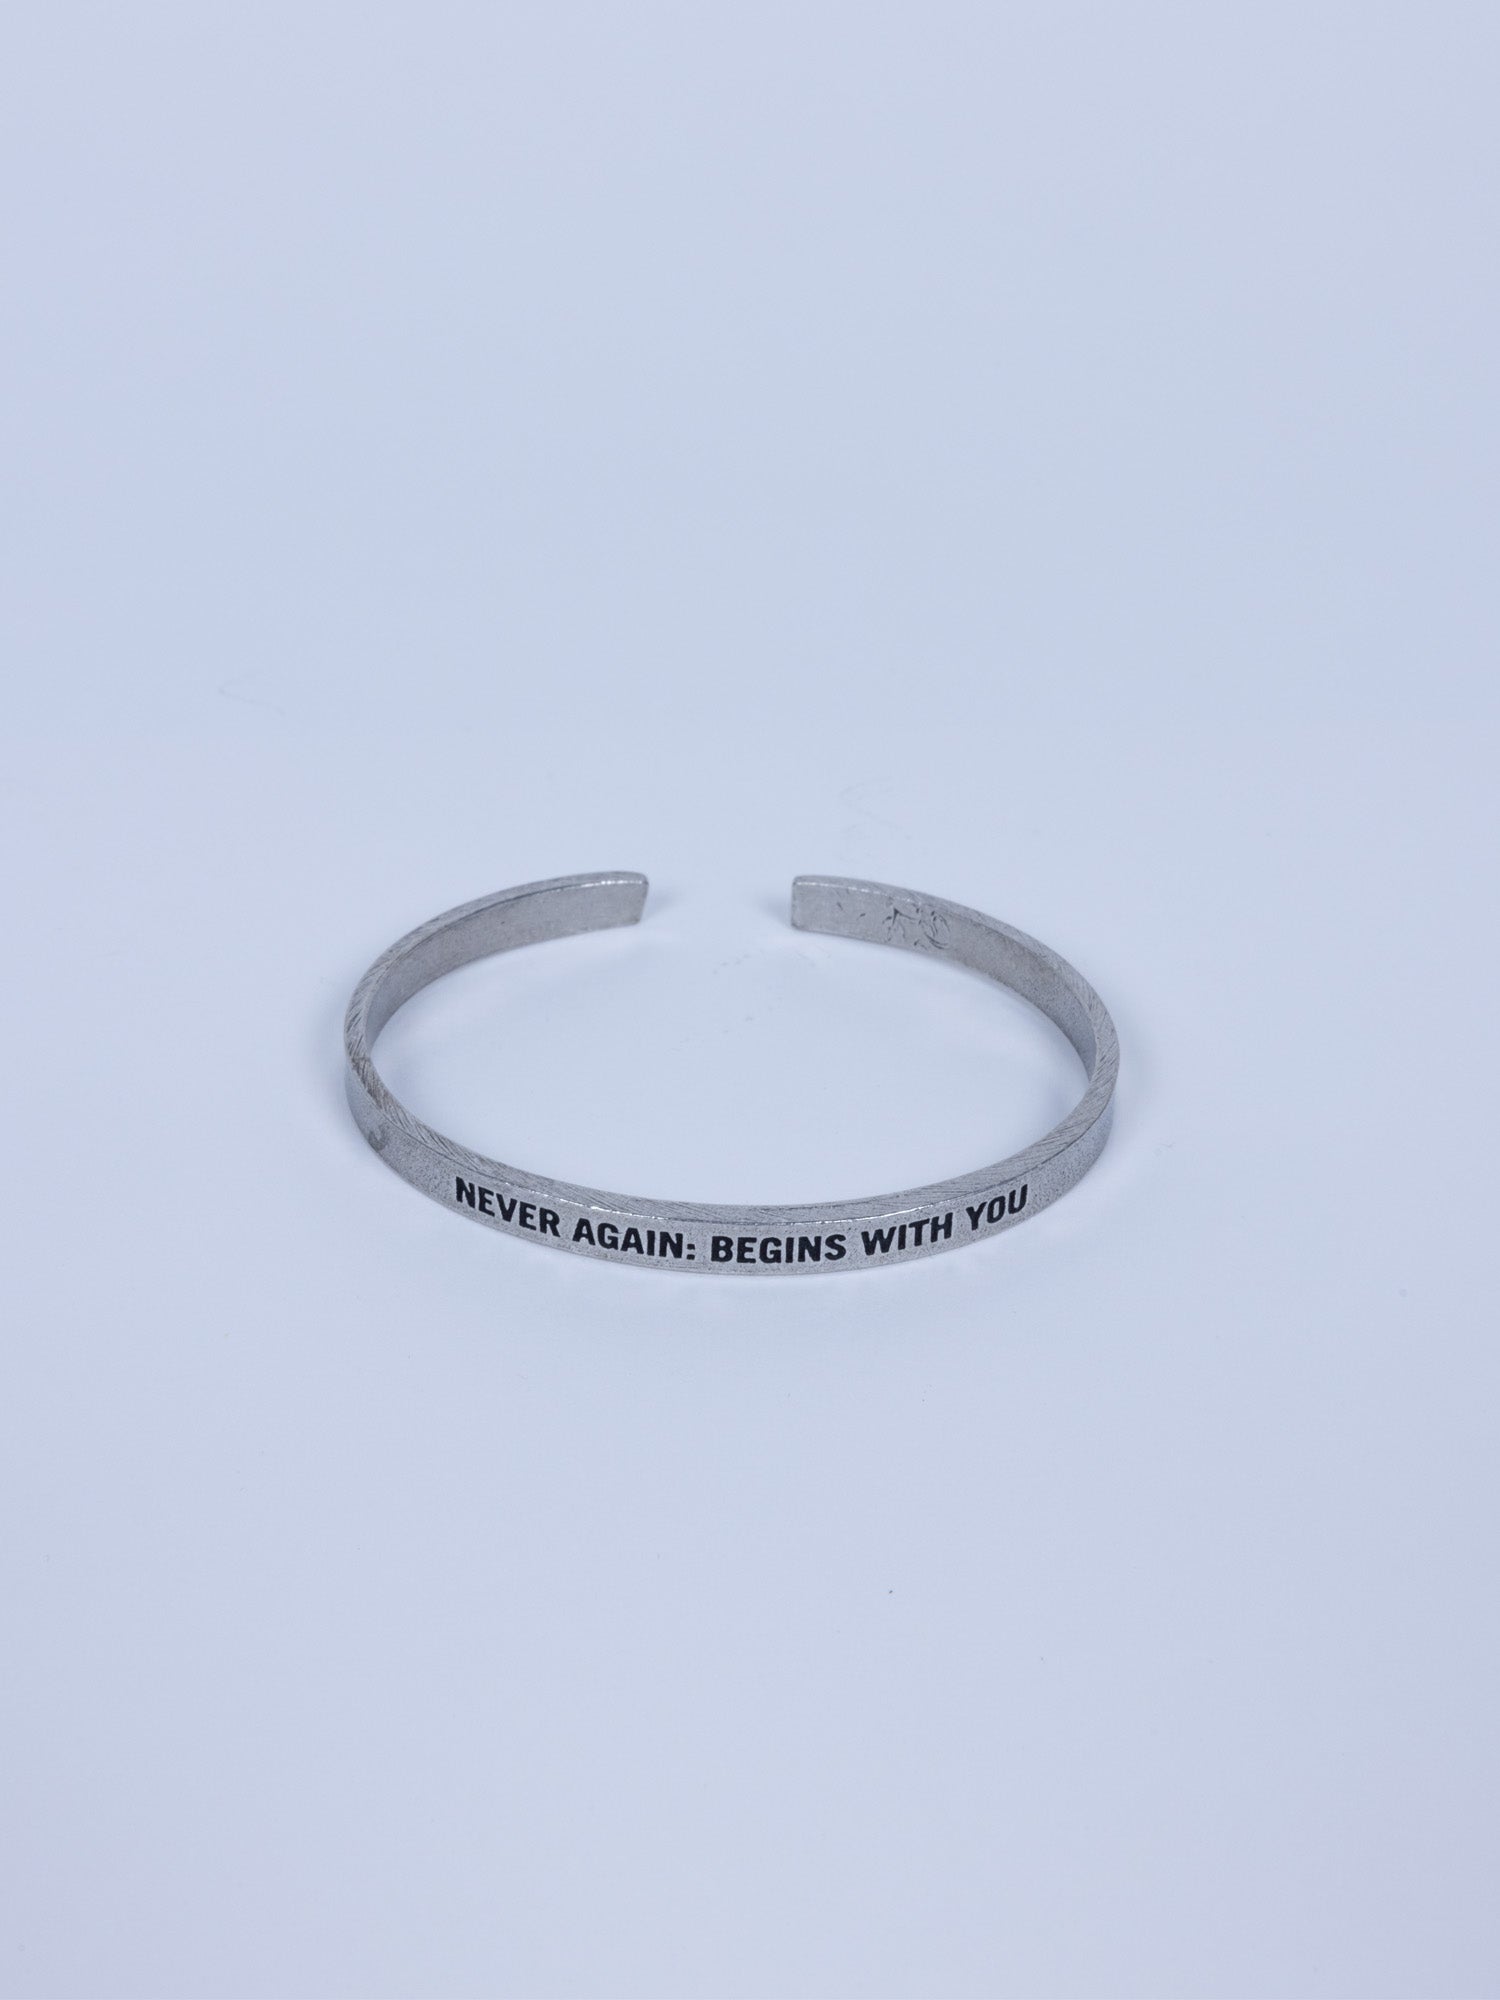 “Never Again: Begins with You” Cuff Bracelet